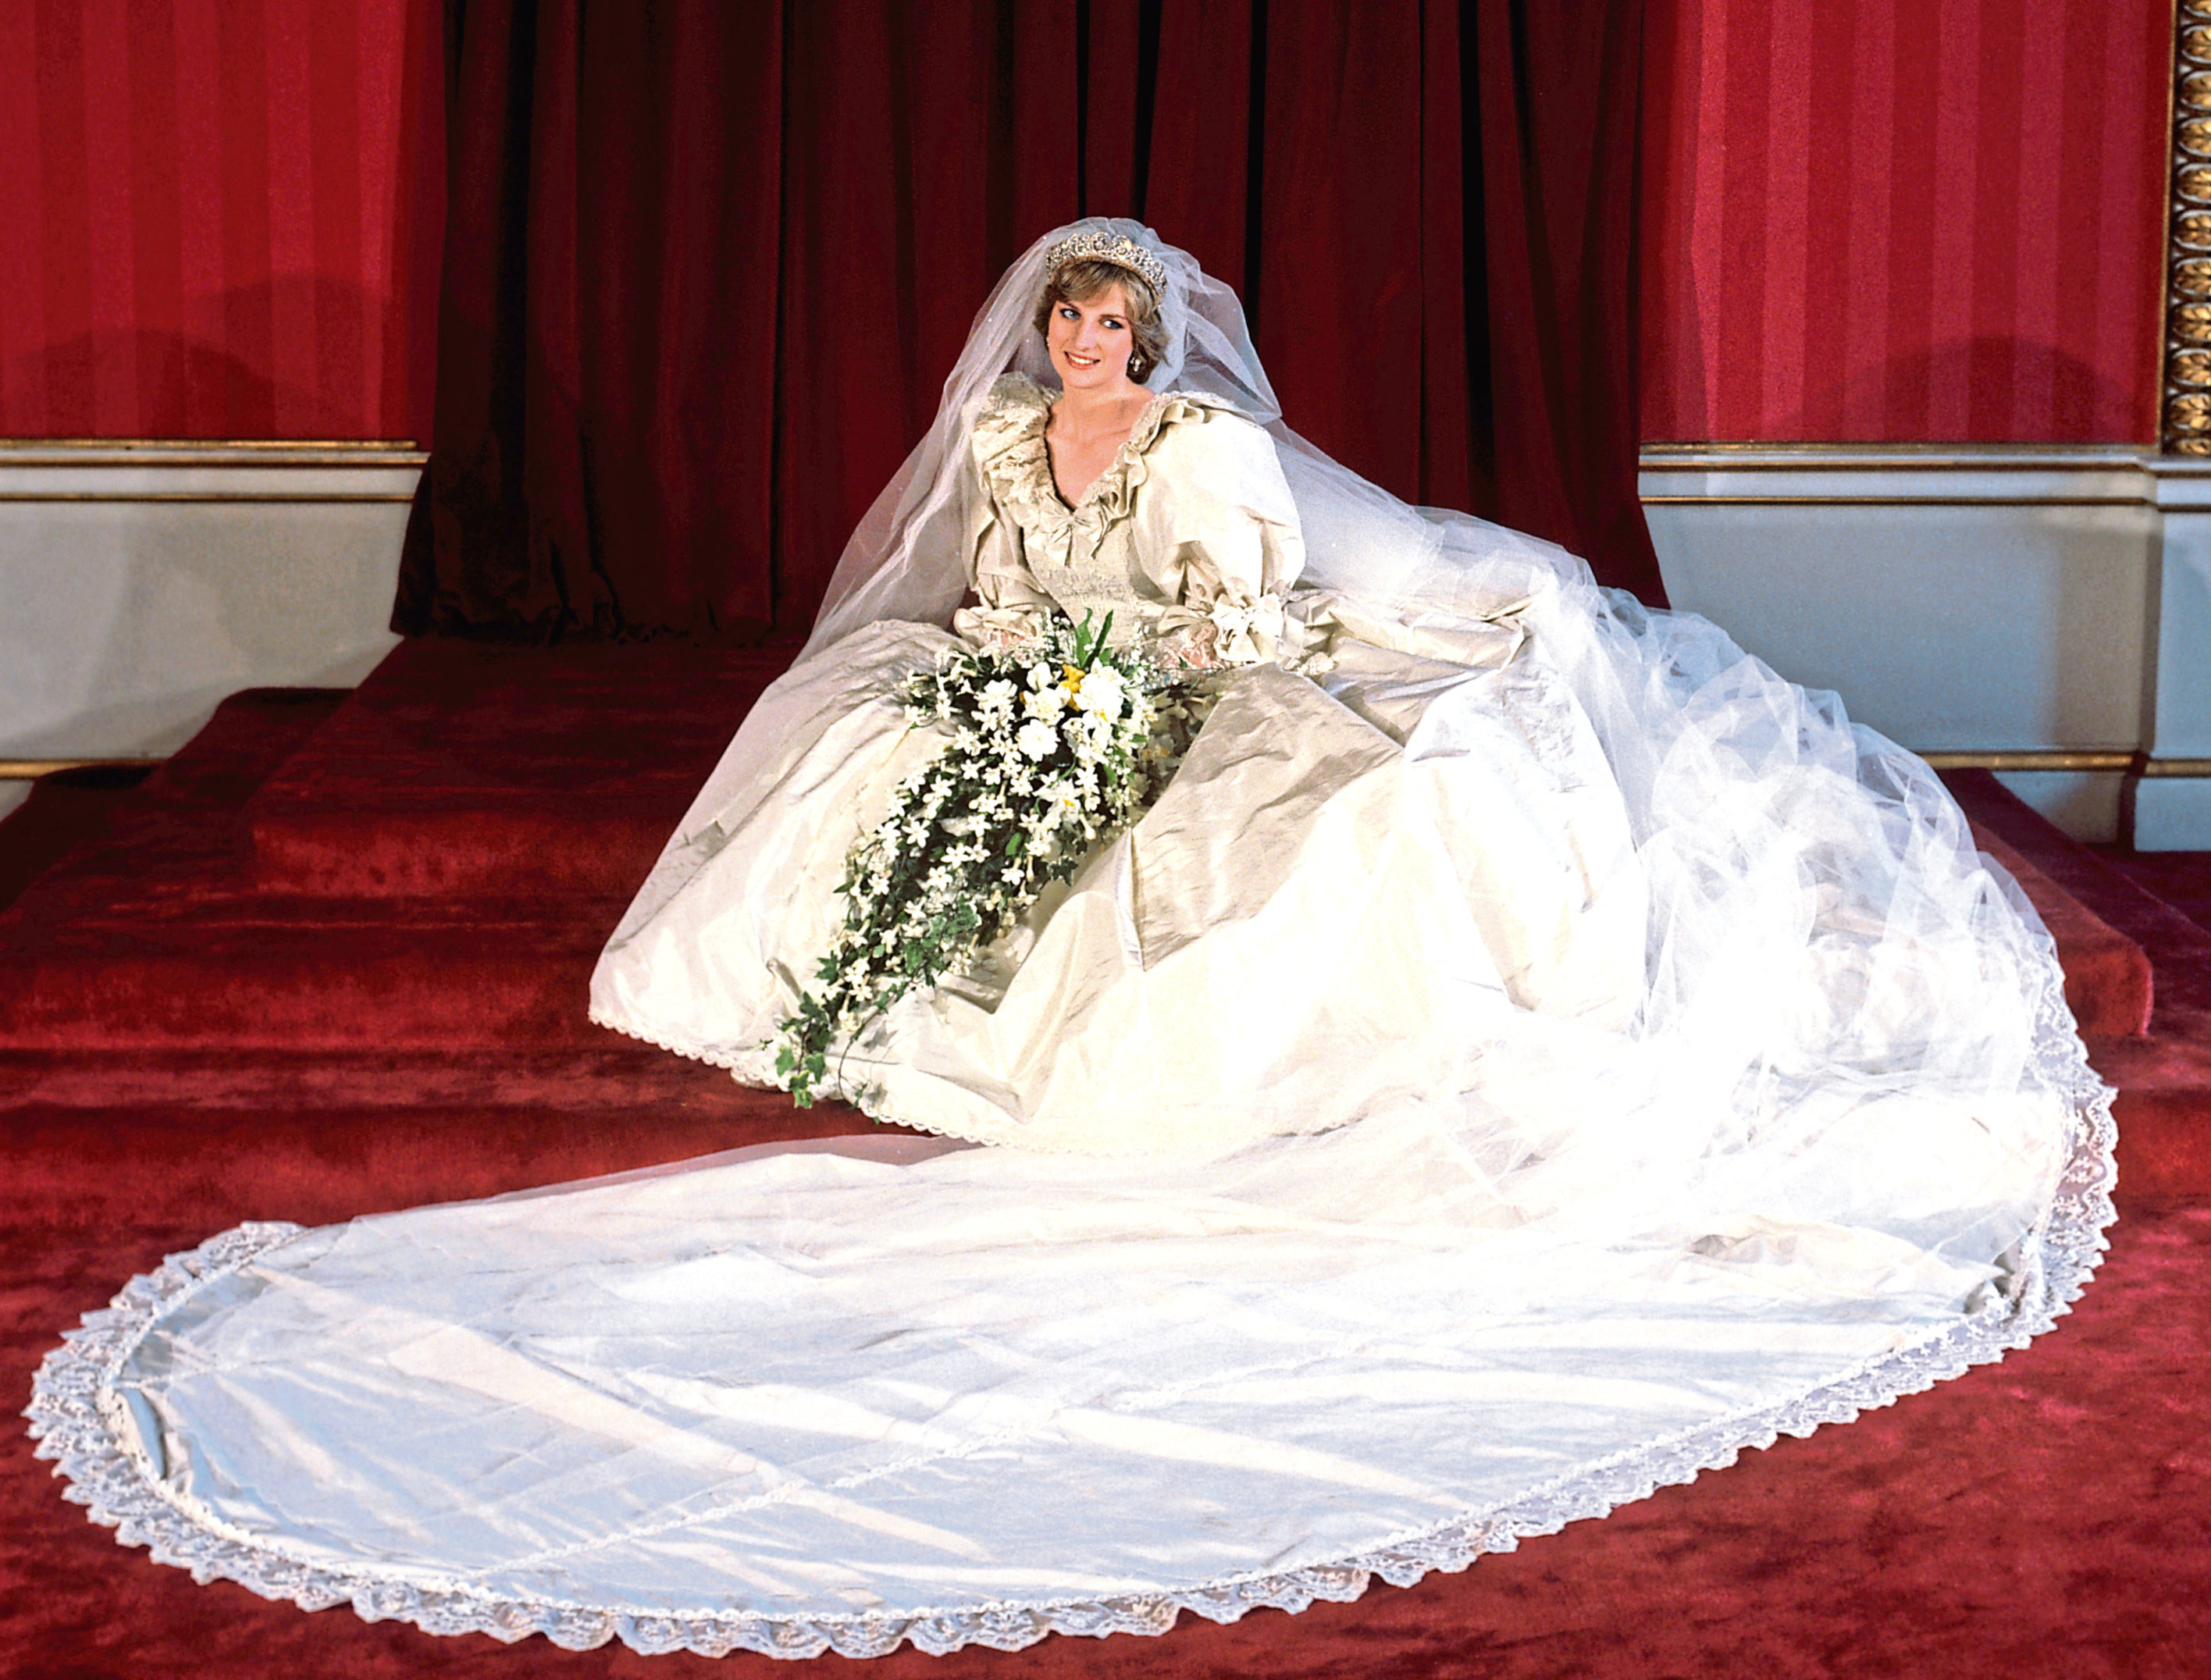 The Princess of Wales seated in her bridal gown at Buckingham Palace after her marriage to Prince Charles at St. Paul's Cathedral.